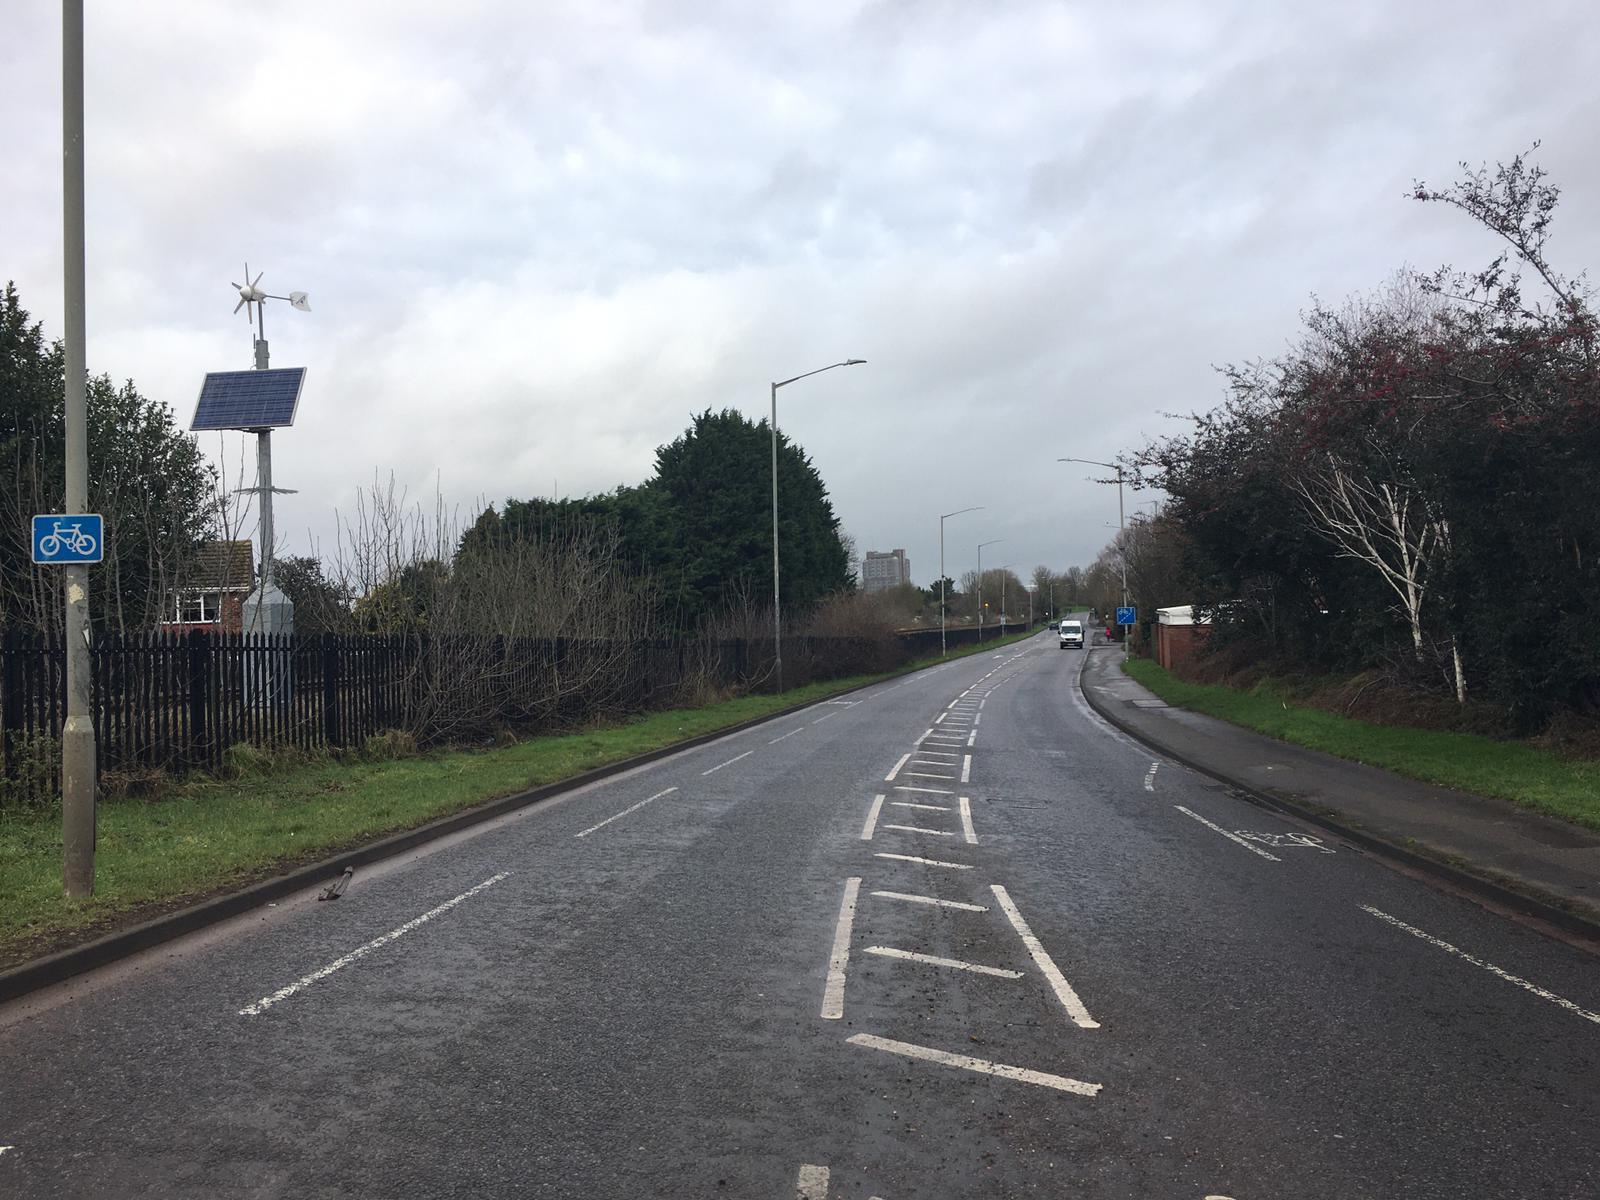 The Mandeville Road is a 30mph road but drivers have been seen speeding on there in recent months